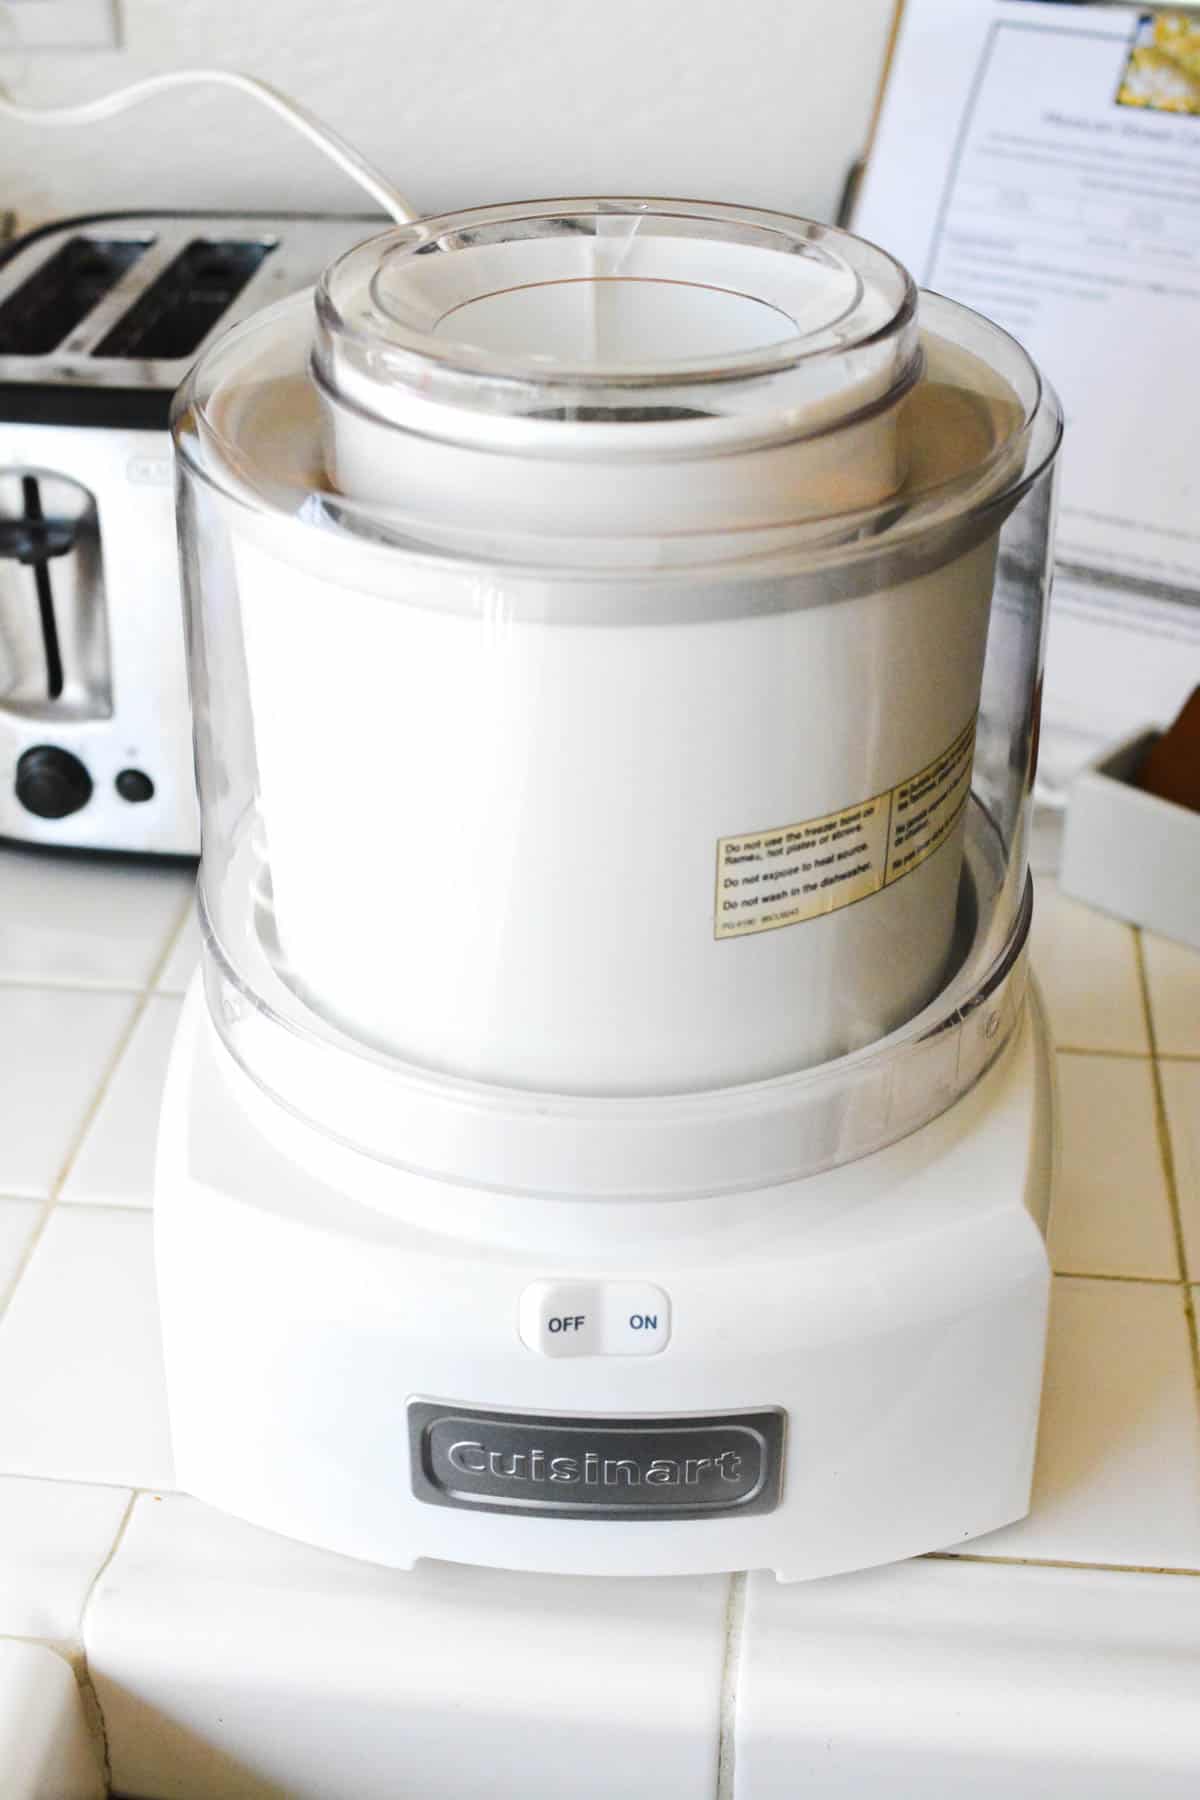 A Cuisanart ice cream maker on a counter.